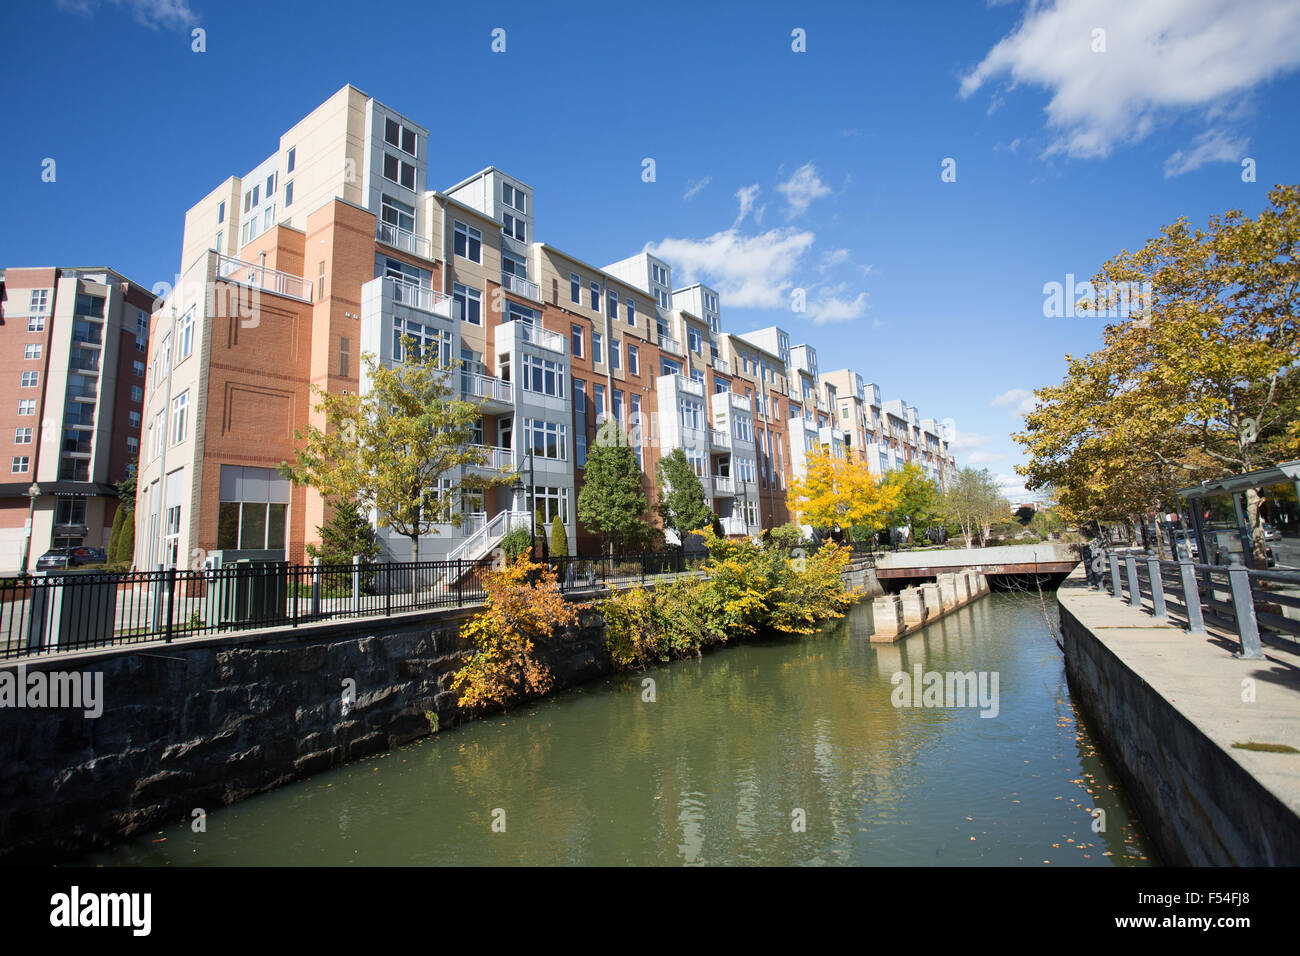 town home providence rhode island Stock Photo